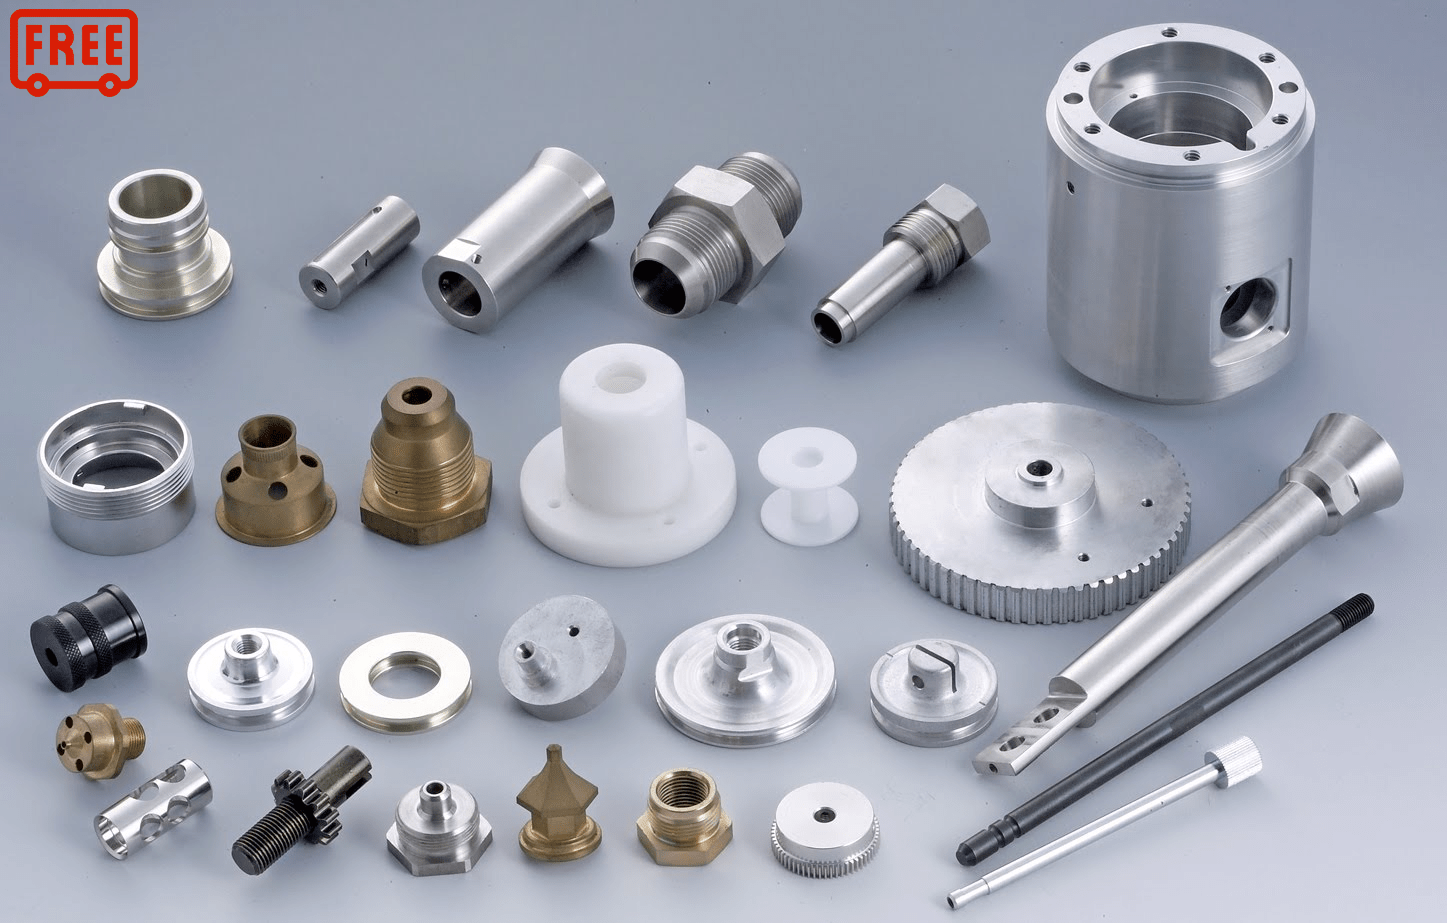 Free Prototype-Precise Mechanical Die Casting Manufacture